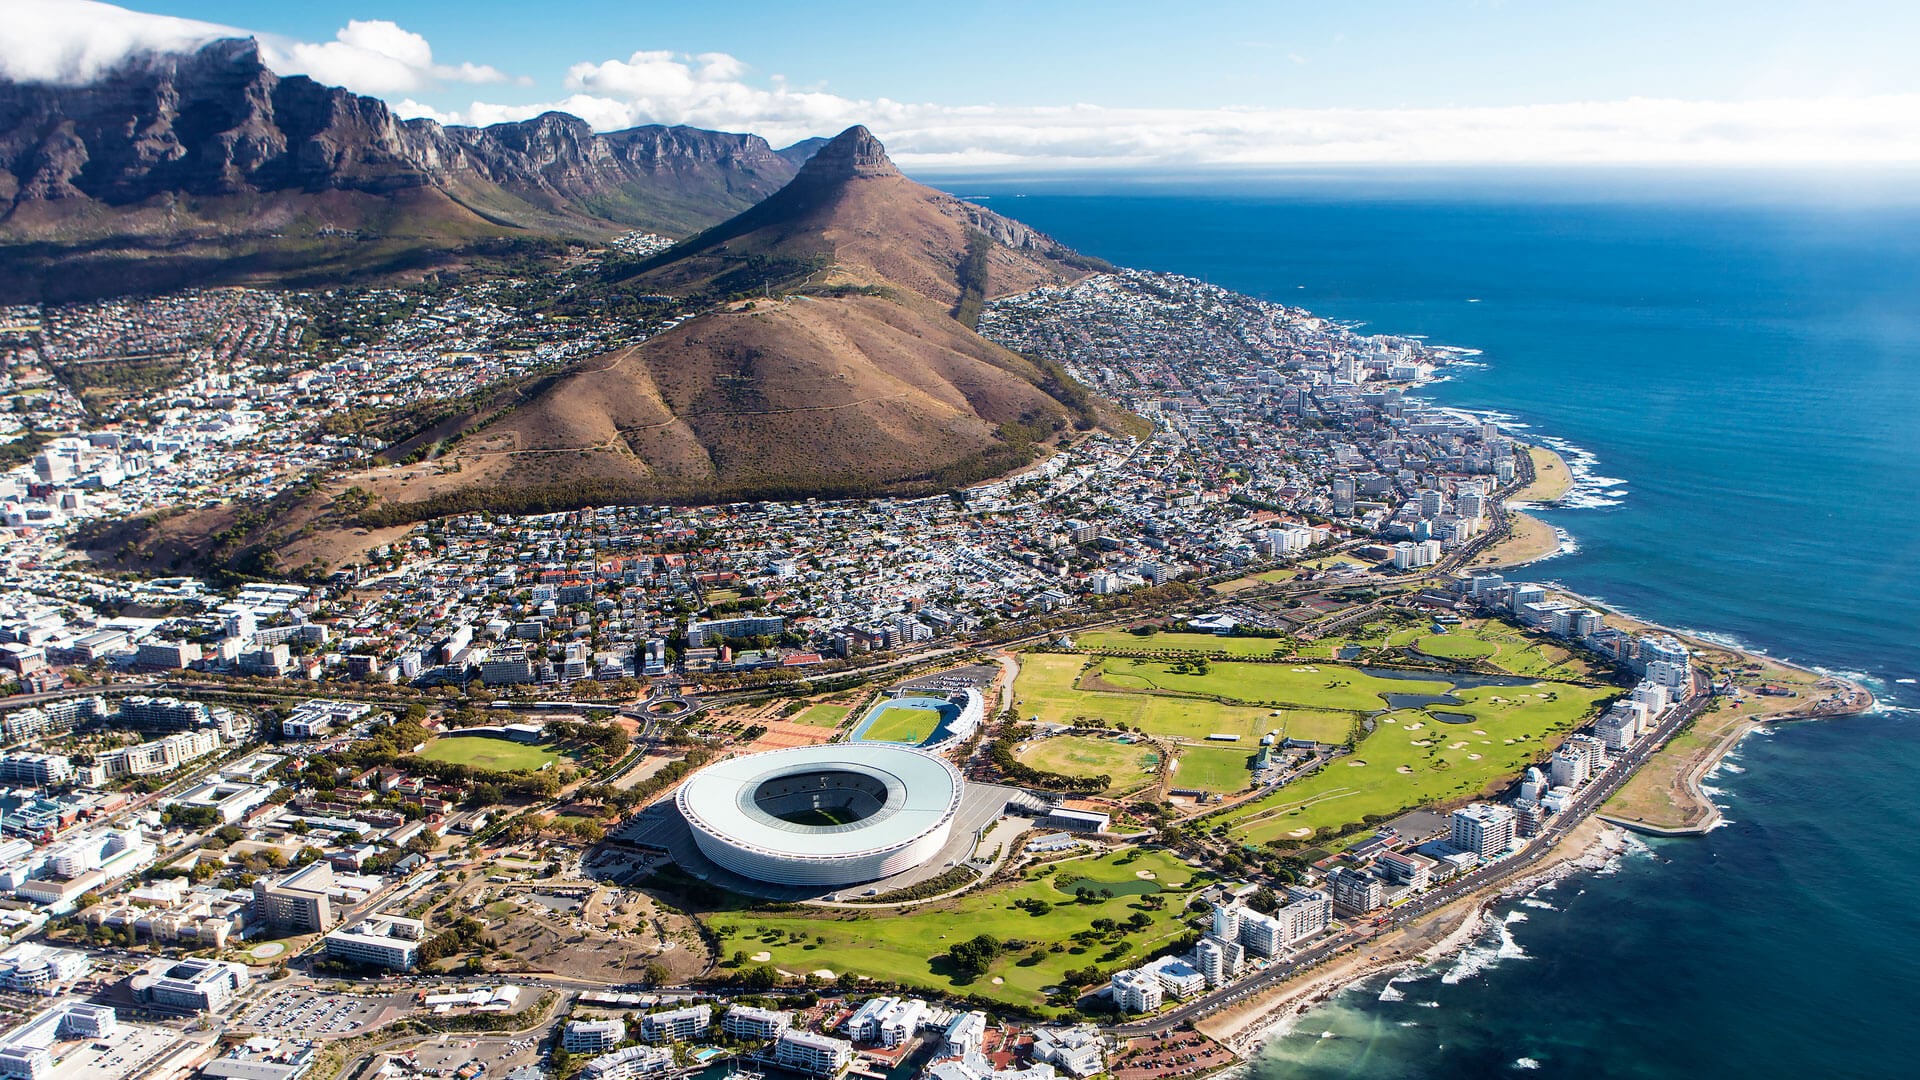 Cape town, South Africa